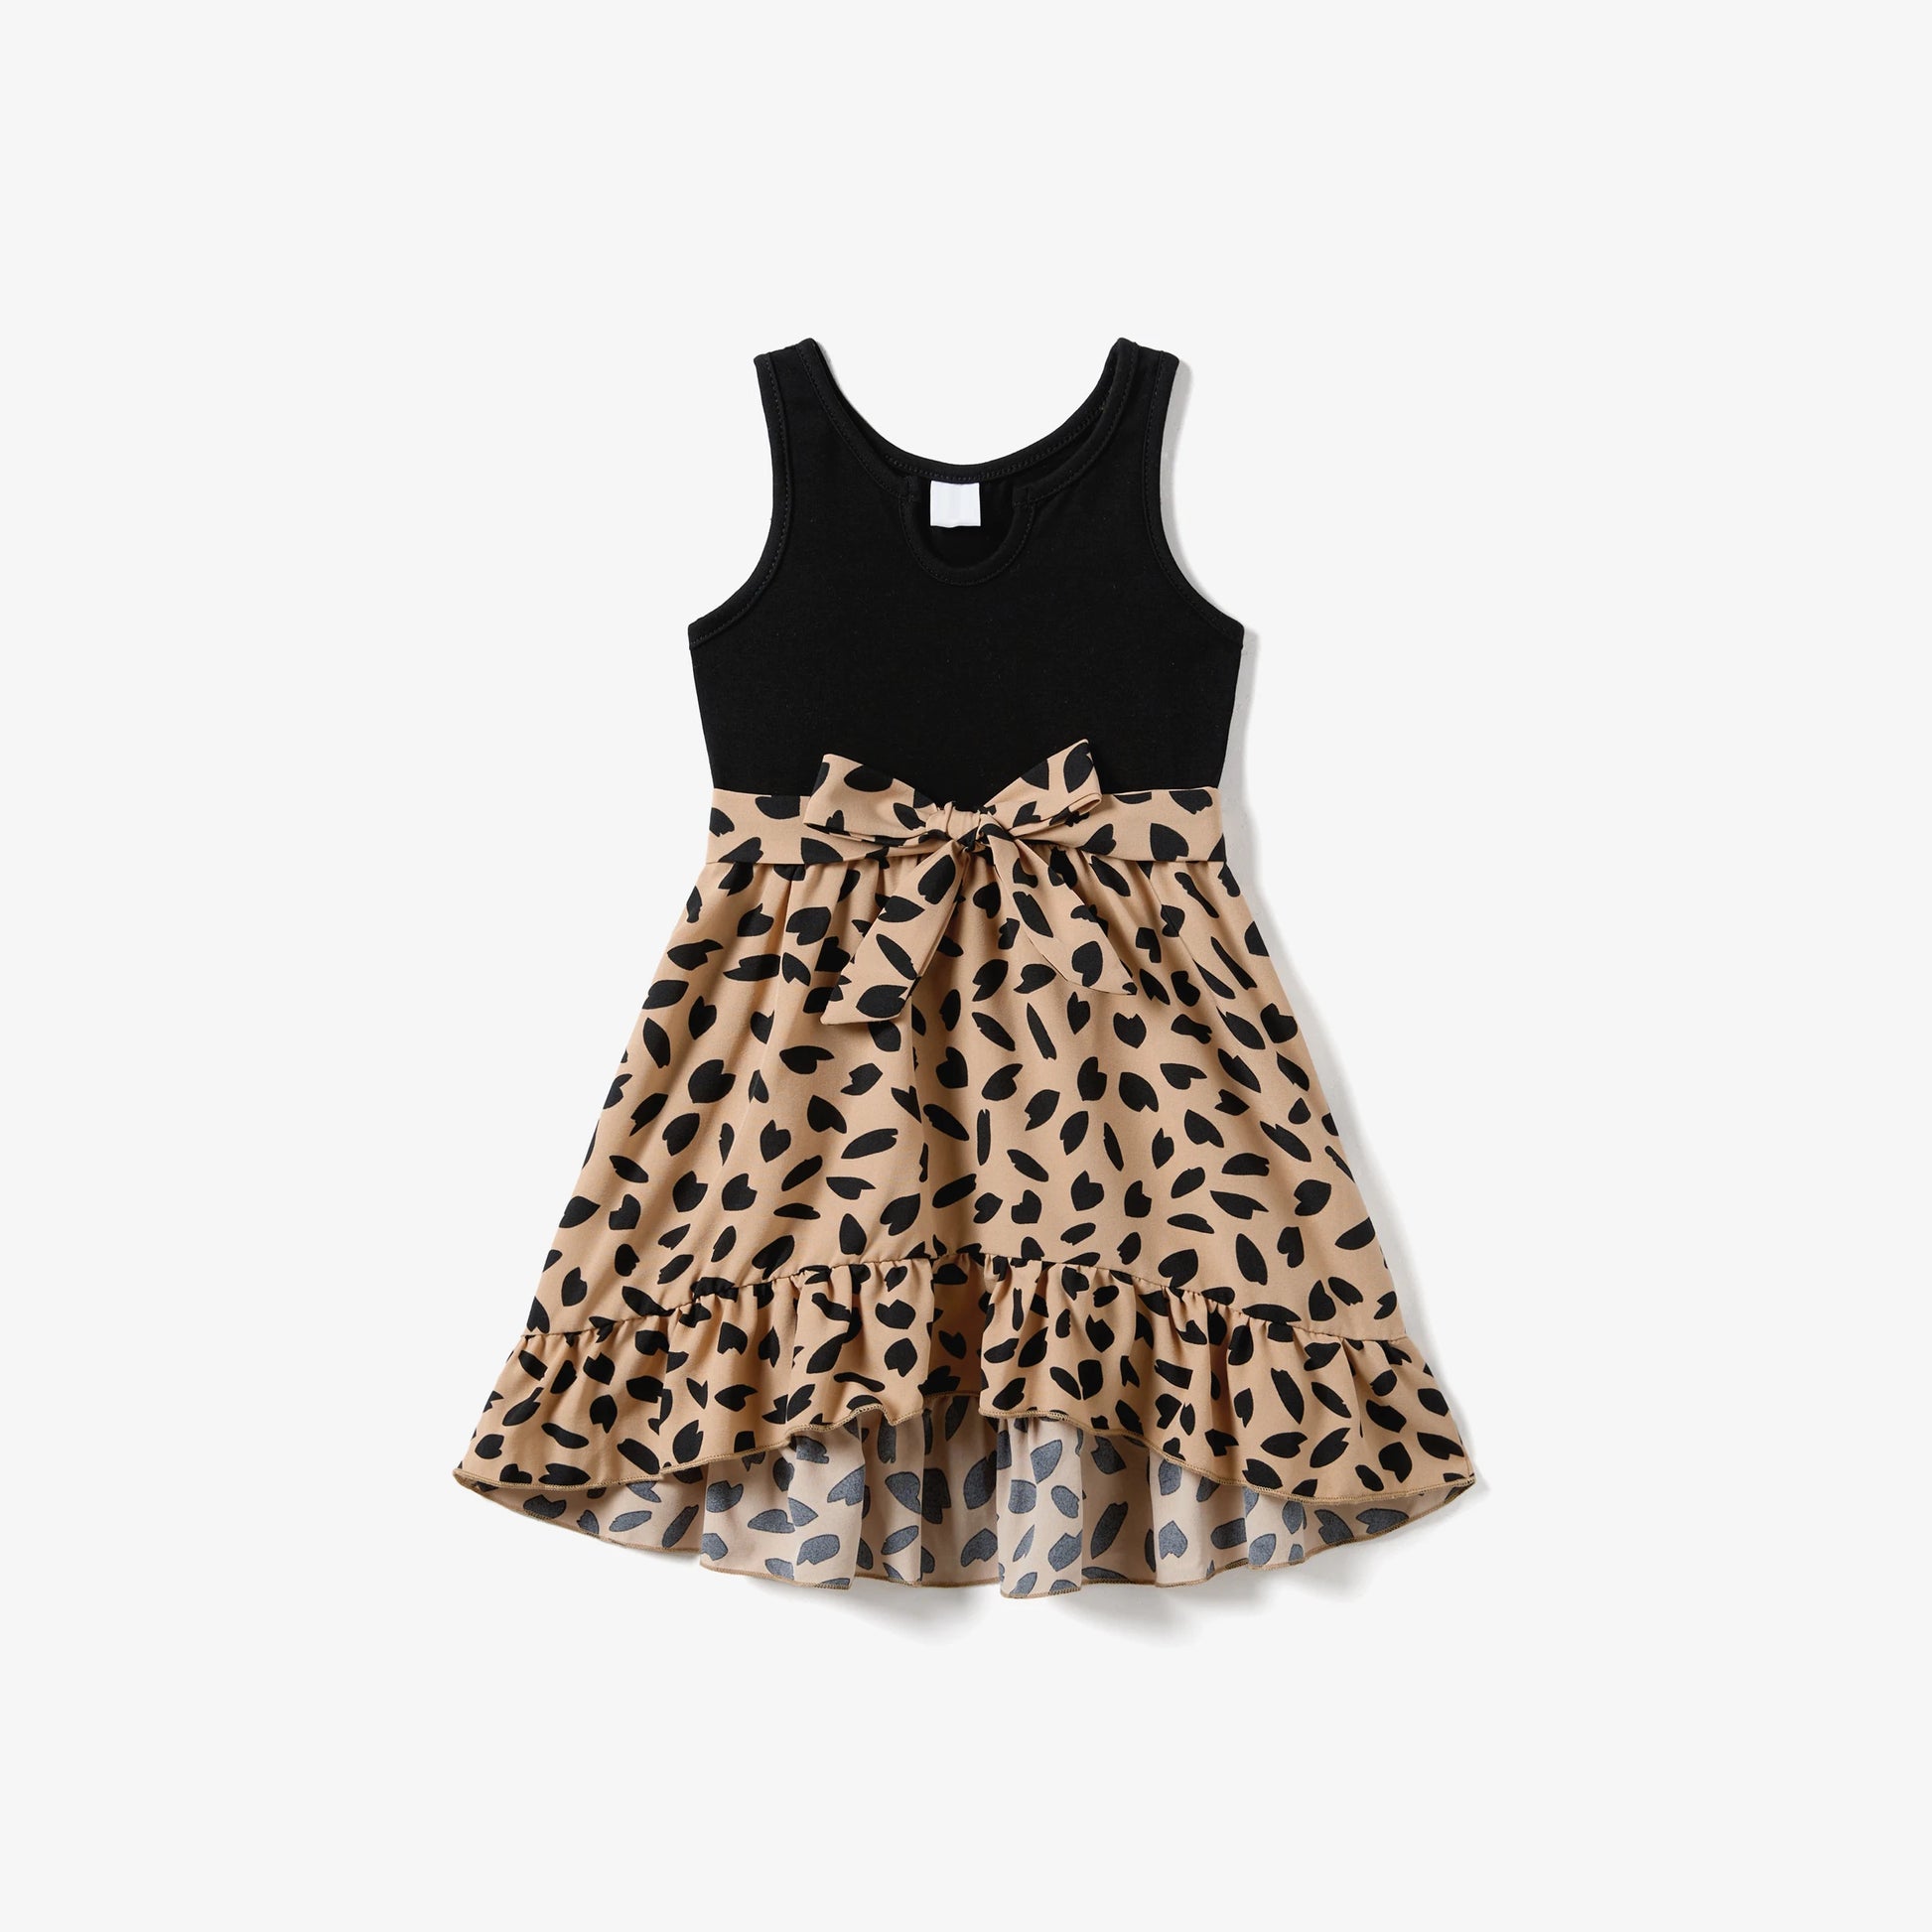 Matching Family Outfits Mommy and Me Dress Leopard Bowknot Dresses - ChildAngle